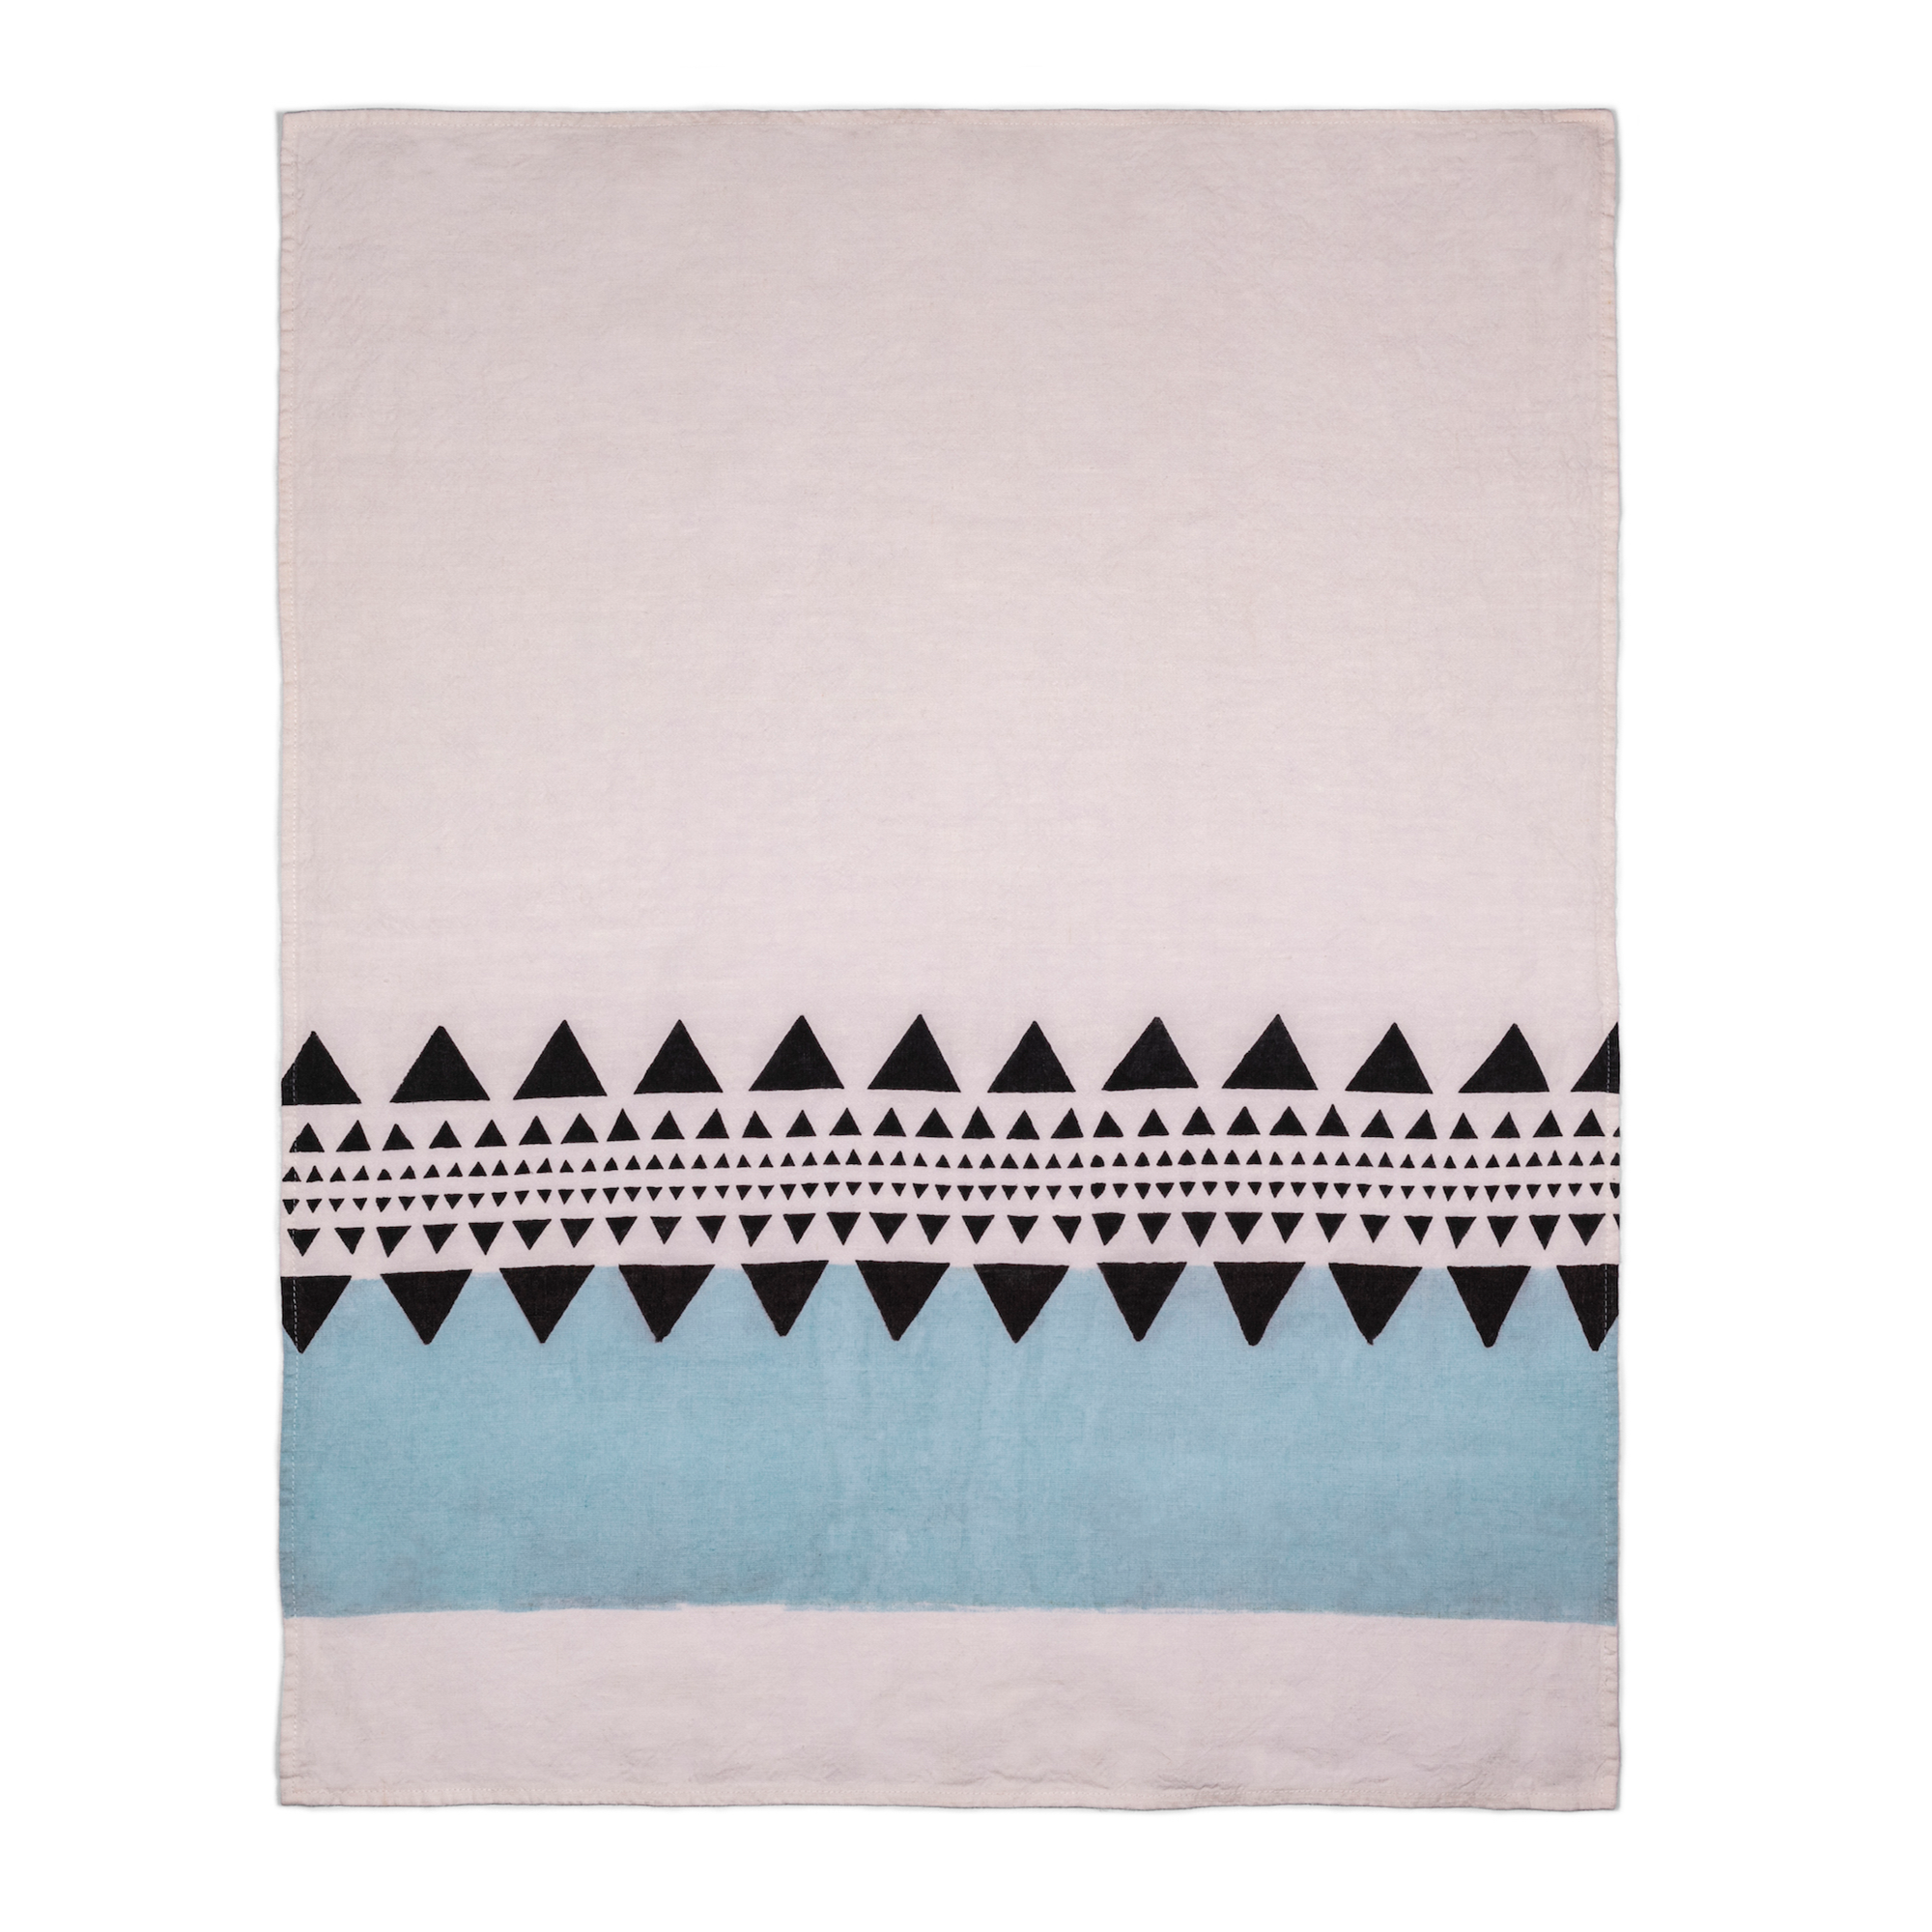 Unfolded tea towel featuring a white base adorned with modern light blue and black geometric elements.